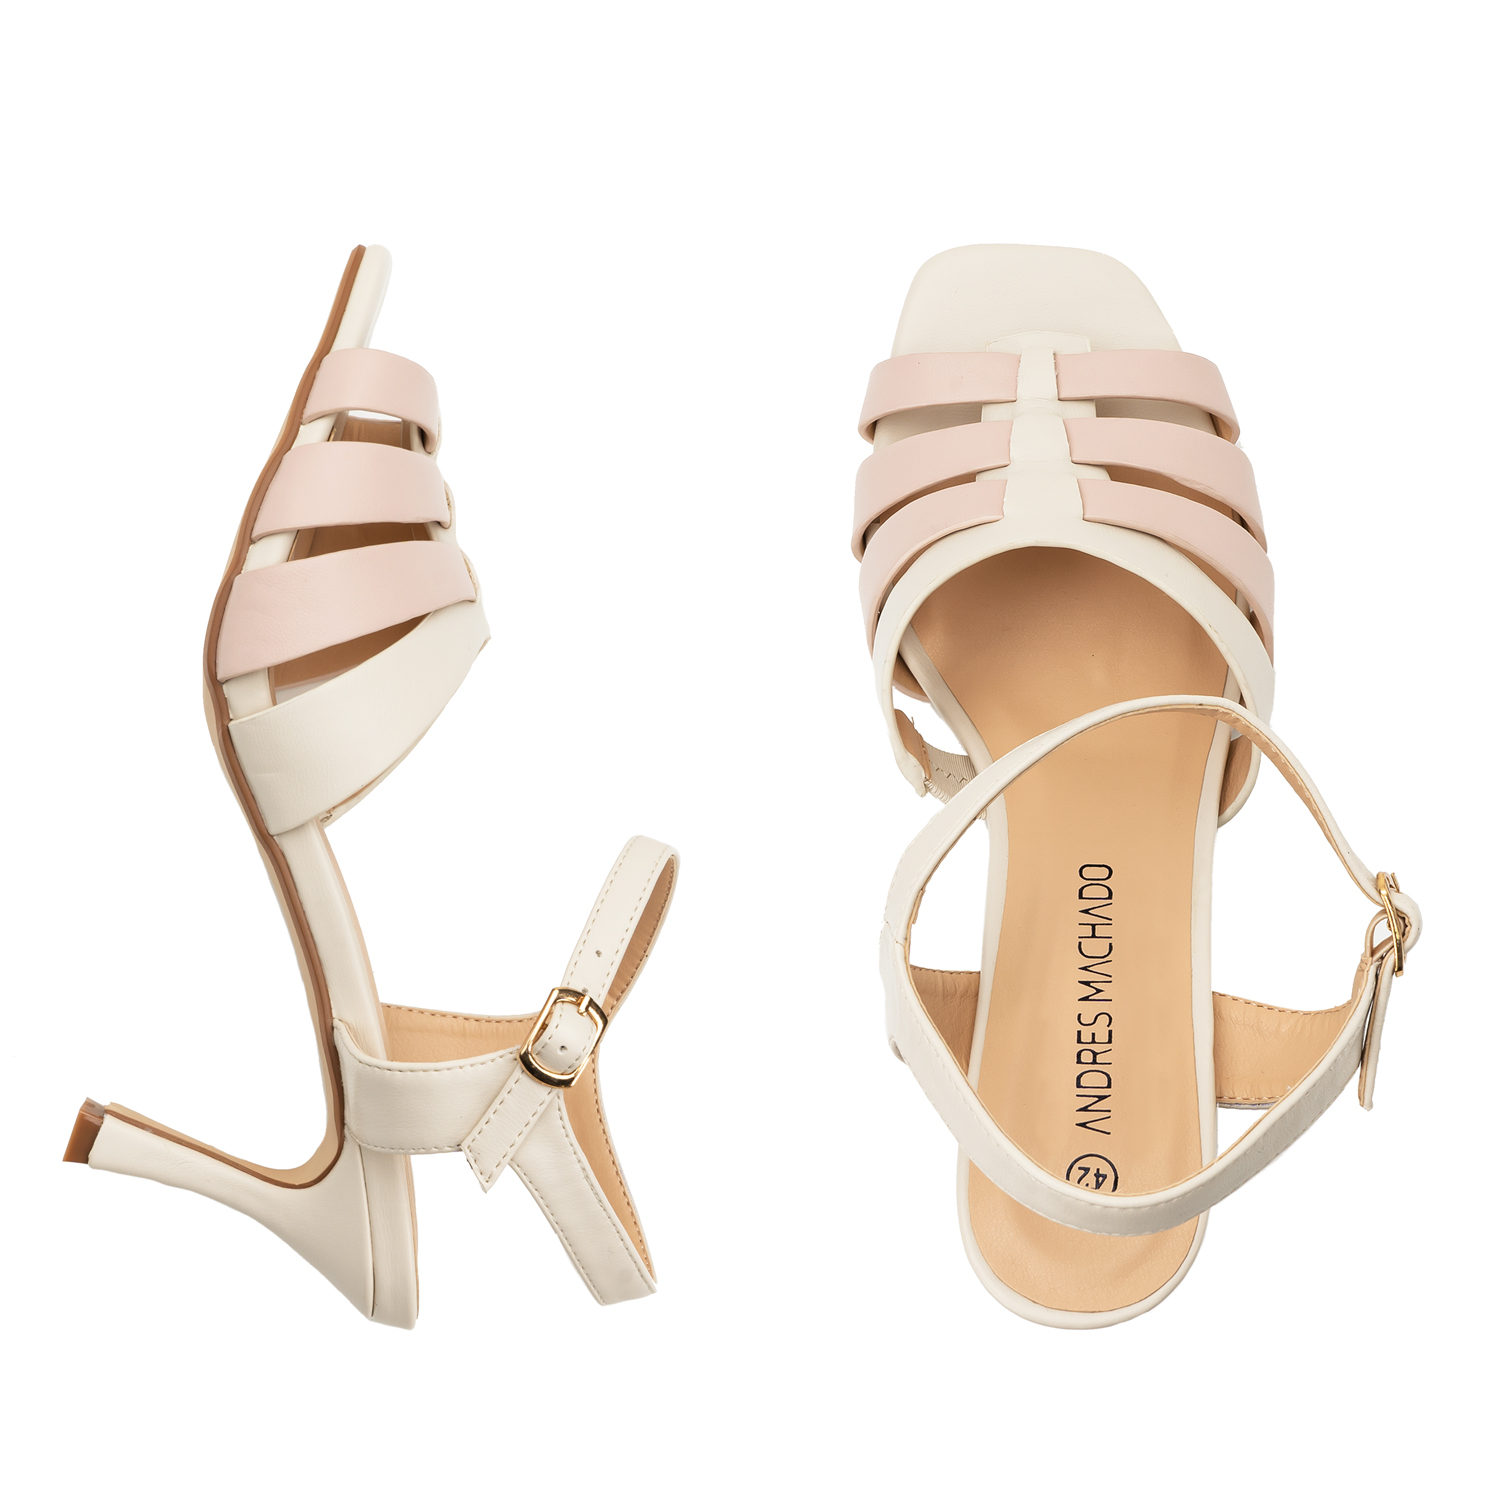 Dual Color Sandals in White and Baby Pink Faux Leather 